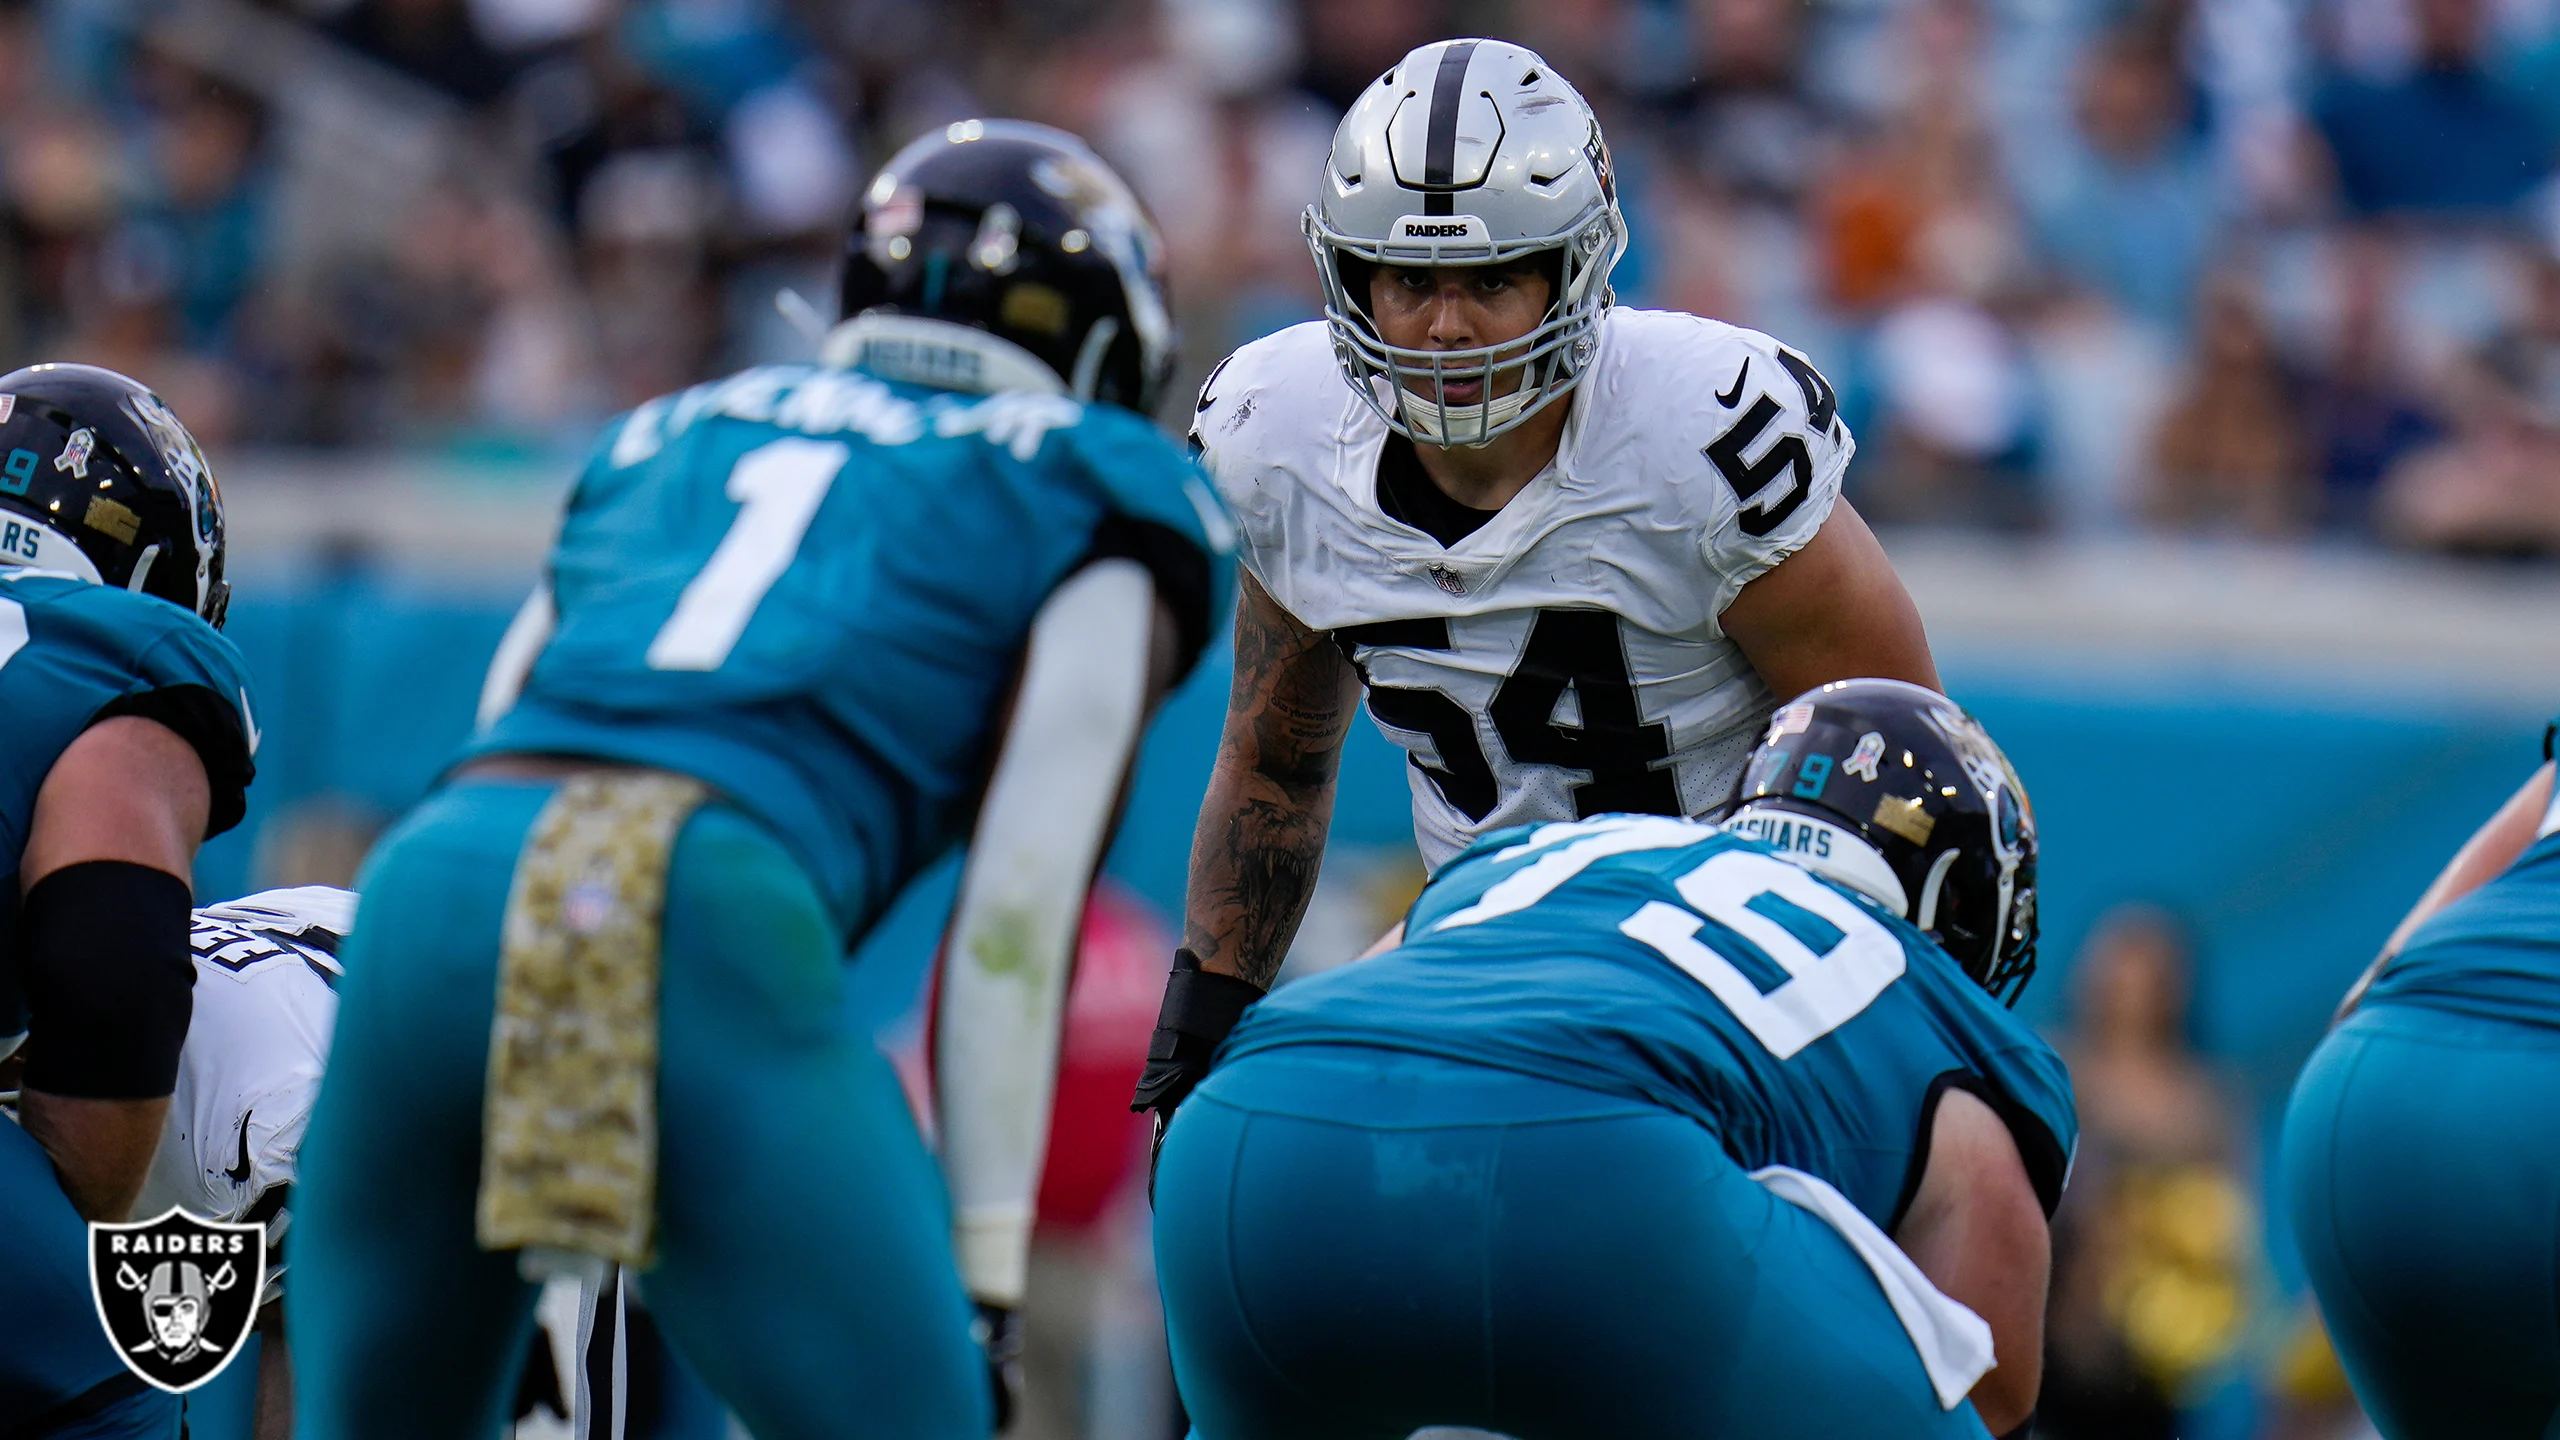 Blake Martinez appears in a game for the Las Vegas Raiders against the Jacksonville Jaguars. Martinez is wearing number 54